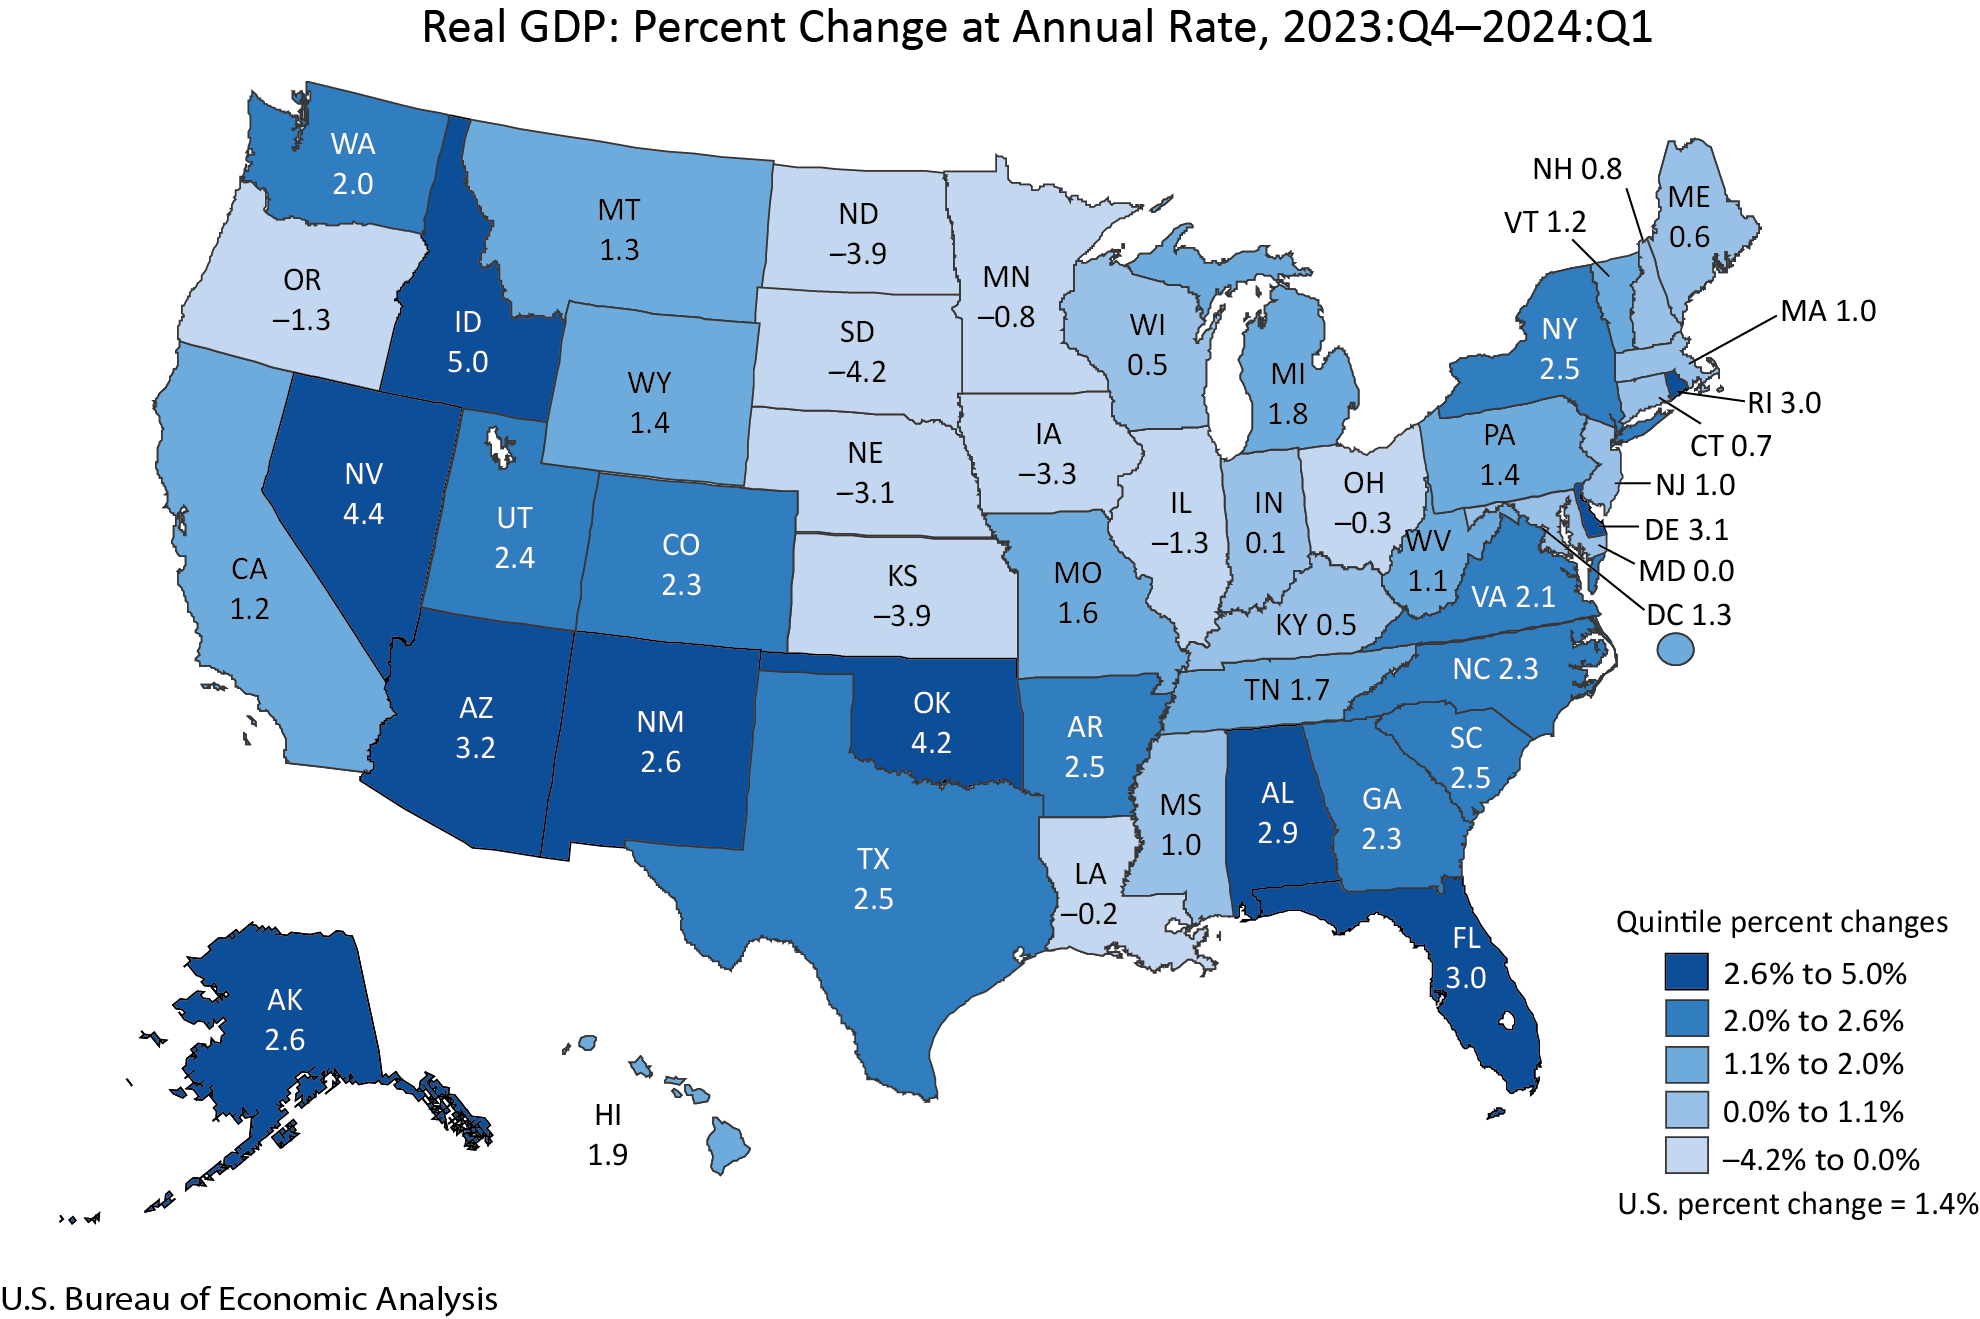 Real GDP: Percent Change at Annual Rate, 2023:Q4-2024:Q1